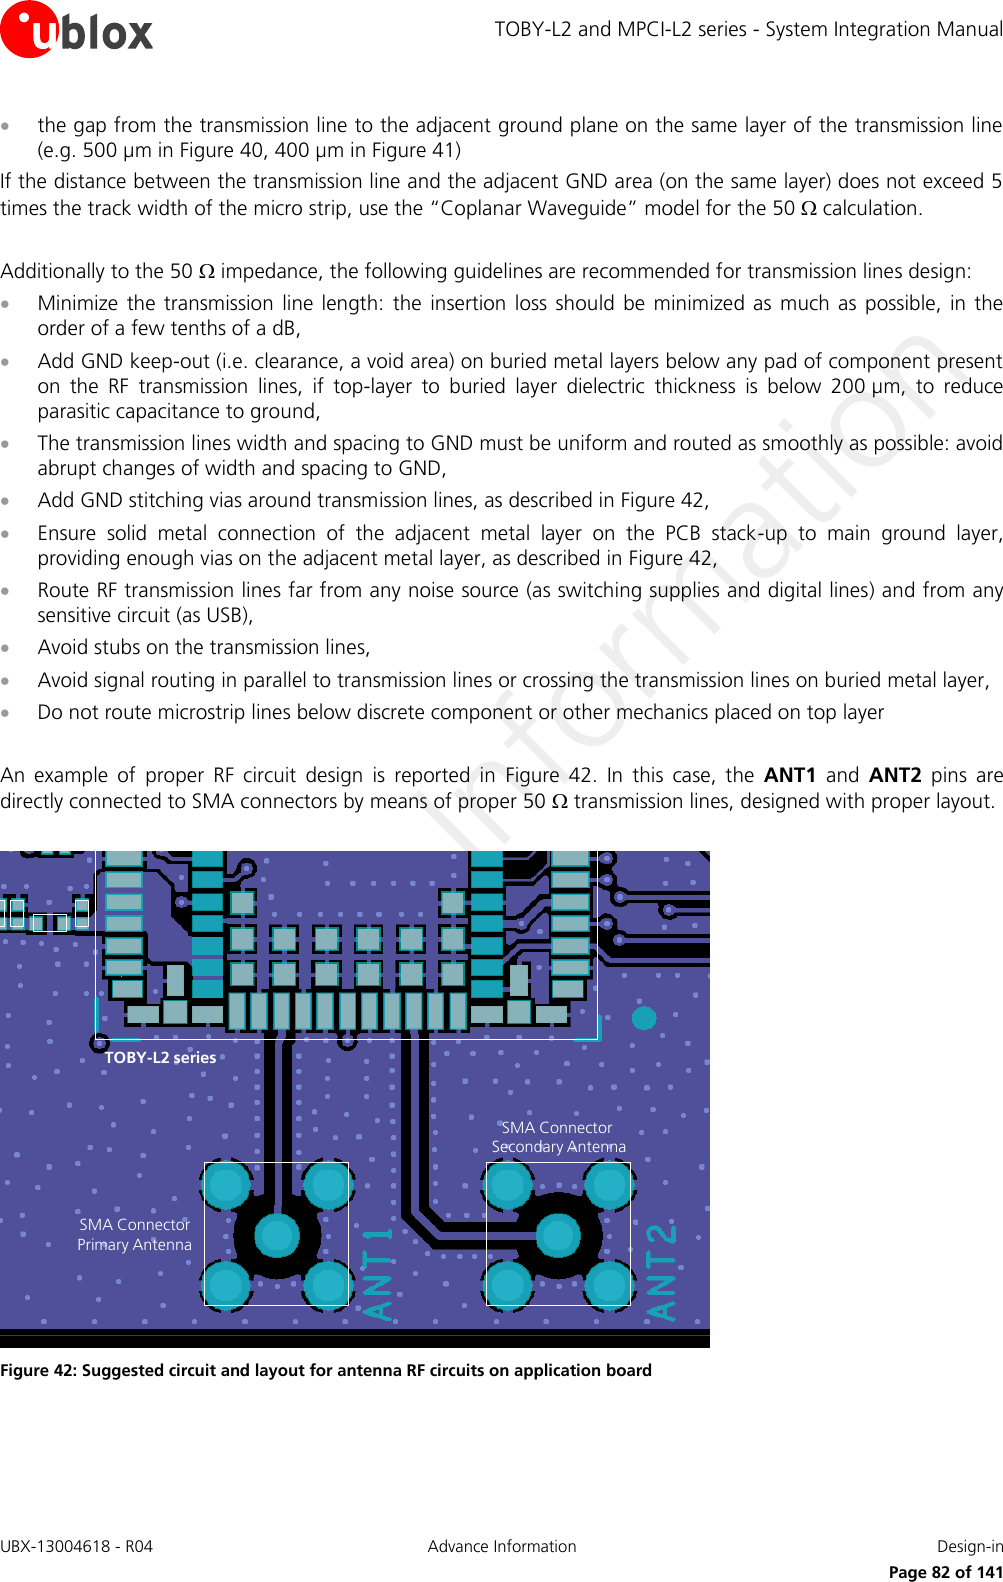 TOBY-L2 and MPCI-L2 series - System Integration Manual UBX-13004618 - R04  Advance Information  Design-in     Page 82 of 141  the gap from the transmission line to the adjacent ground plane on the same layer of the transmission line (e.g. 500 µm in Figure 40, 400 µm in Figure 41) If the distance between the transmission line and the adjacent GND area (on the same layer) does not exceed 5 times the track width of the micro strip, use the “Coplanar Waveguide” model for the 50  calculation.  Additionally to the 50  impedance, the following guidelines are recommended for transmission lines design:  Minimize  the  transmission  line length: the  insertion  loss  should  be minimized  as  much  as  possible,  in  the order of a few tenths of a dB,  Add GND keep-out (i.e. clearance, a void area) on buried metal layers below any pad of component present on  the  RF  transmission  lines,  if  top-layer  to  buried  layer  dielectric  thickness  is  below  200 µm,  to  reduce parasitic capacitance to ground,  The transmission lines width and spacing to GND must be uniform and routed as smoothly as possible: avoid abrupt changes of width and spacing to GND,  Add GND stitching vias around transmission lines, as described in Figure 42,  Ensure  solid  metal  connection  of  the  adjacent  metal  layer  on  the  PCB  stack-up  to  main  ground  layer, providing enough vias on the adjacent metal layer, as described in Figure 42,  Route RF transmission lines far from any noise source (as switching supplies and digital lines) and from any sensitive circuit (as USB),  Avoid stubs on the transmission lines,  Avoid signal routing in parallel to transmission lines or crossing the transmission lines on buried metal layer,  Do not route microstrip lines below discrete component or other mechanics placed on top layer  An  example  of  proper  RF  circuit  design  is  reported  in  Figure  42.  In  this  case,  the  ANT1  and  ANT2  pins  are directly connected to SMA connectors by means of proper 50  transmission lines, designed with proper layout.  SMA Connector Primary AntennaSMA Connector Secondary AntennaTOBY-L2 series Figure 42: Suggested circuit and layout for antenna RF circuits on application board  